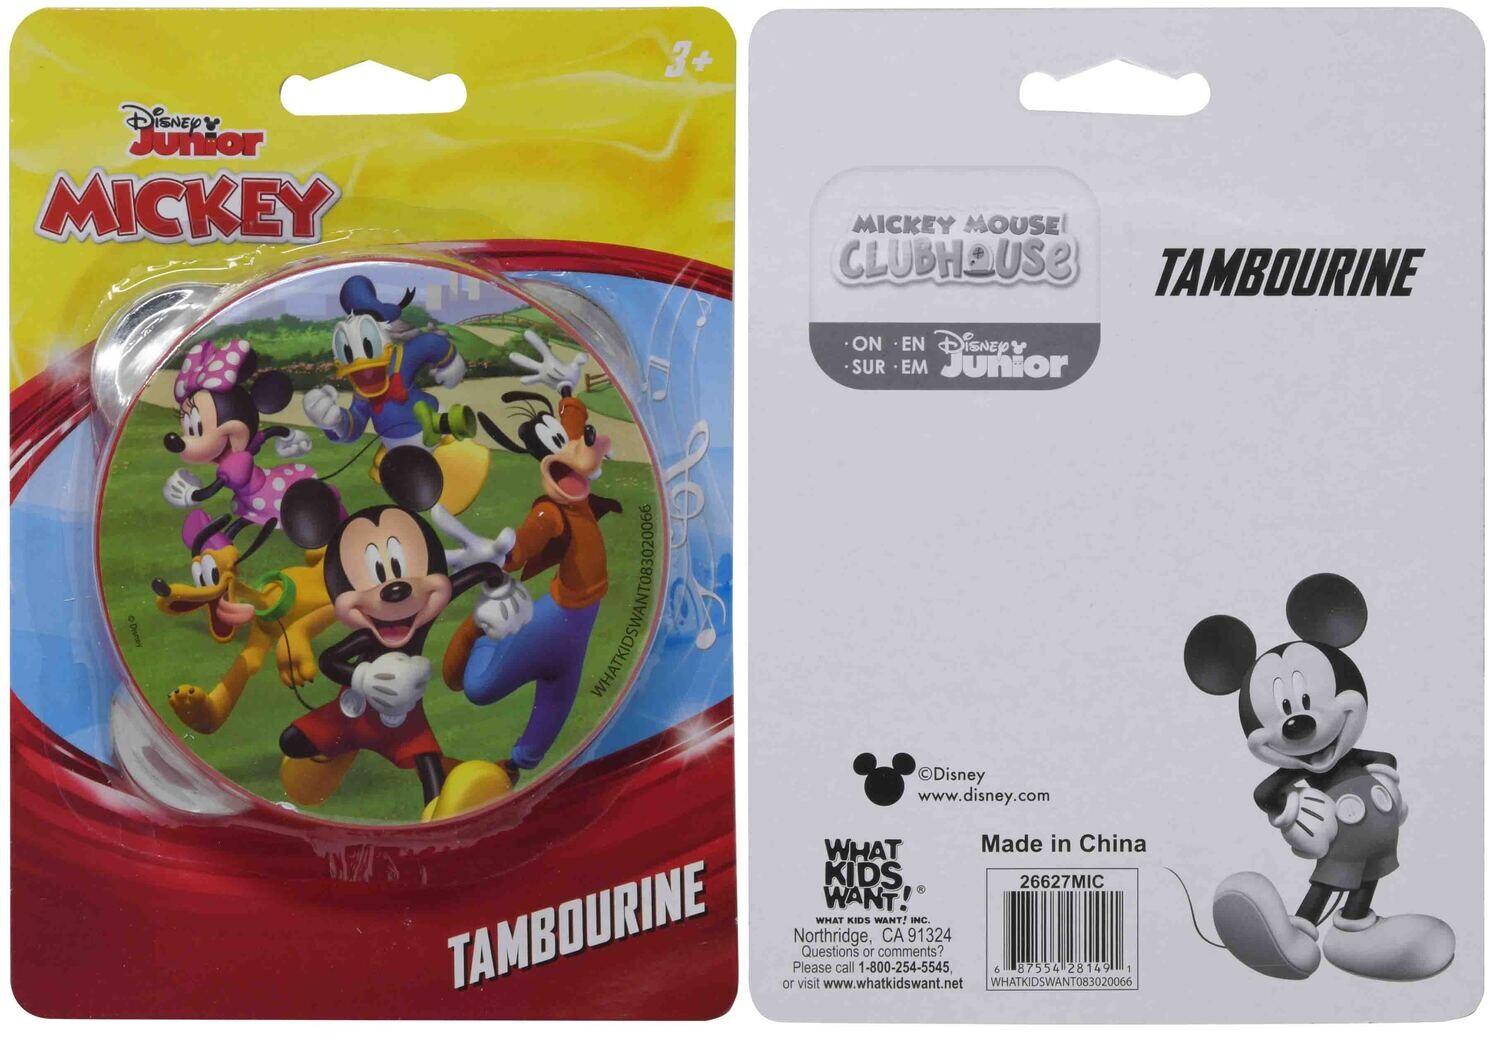 $3.59 NOVELTY MIX / DISNEY TAMBOURINE IN BLISTER CARD